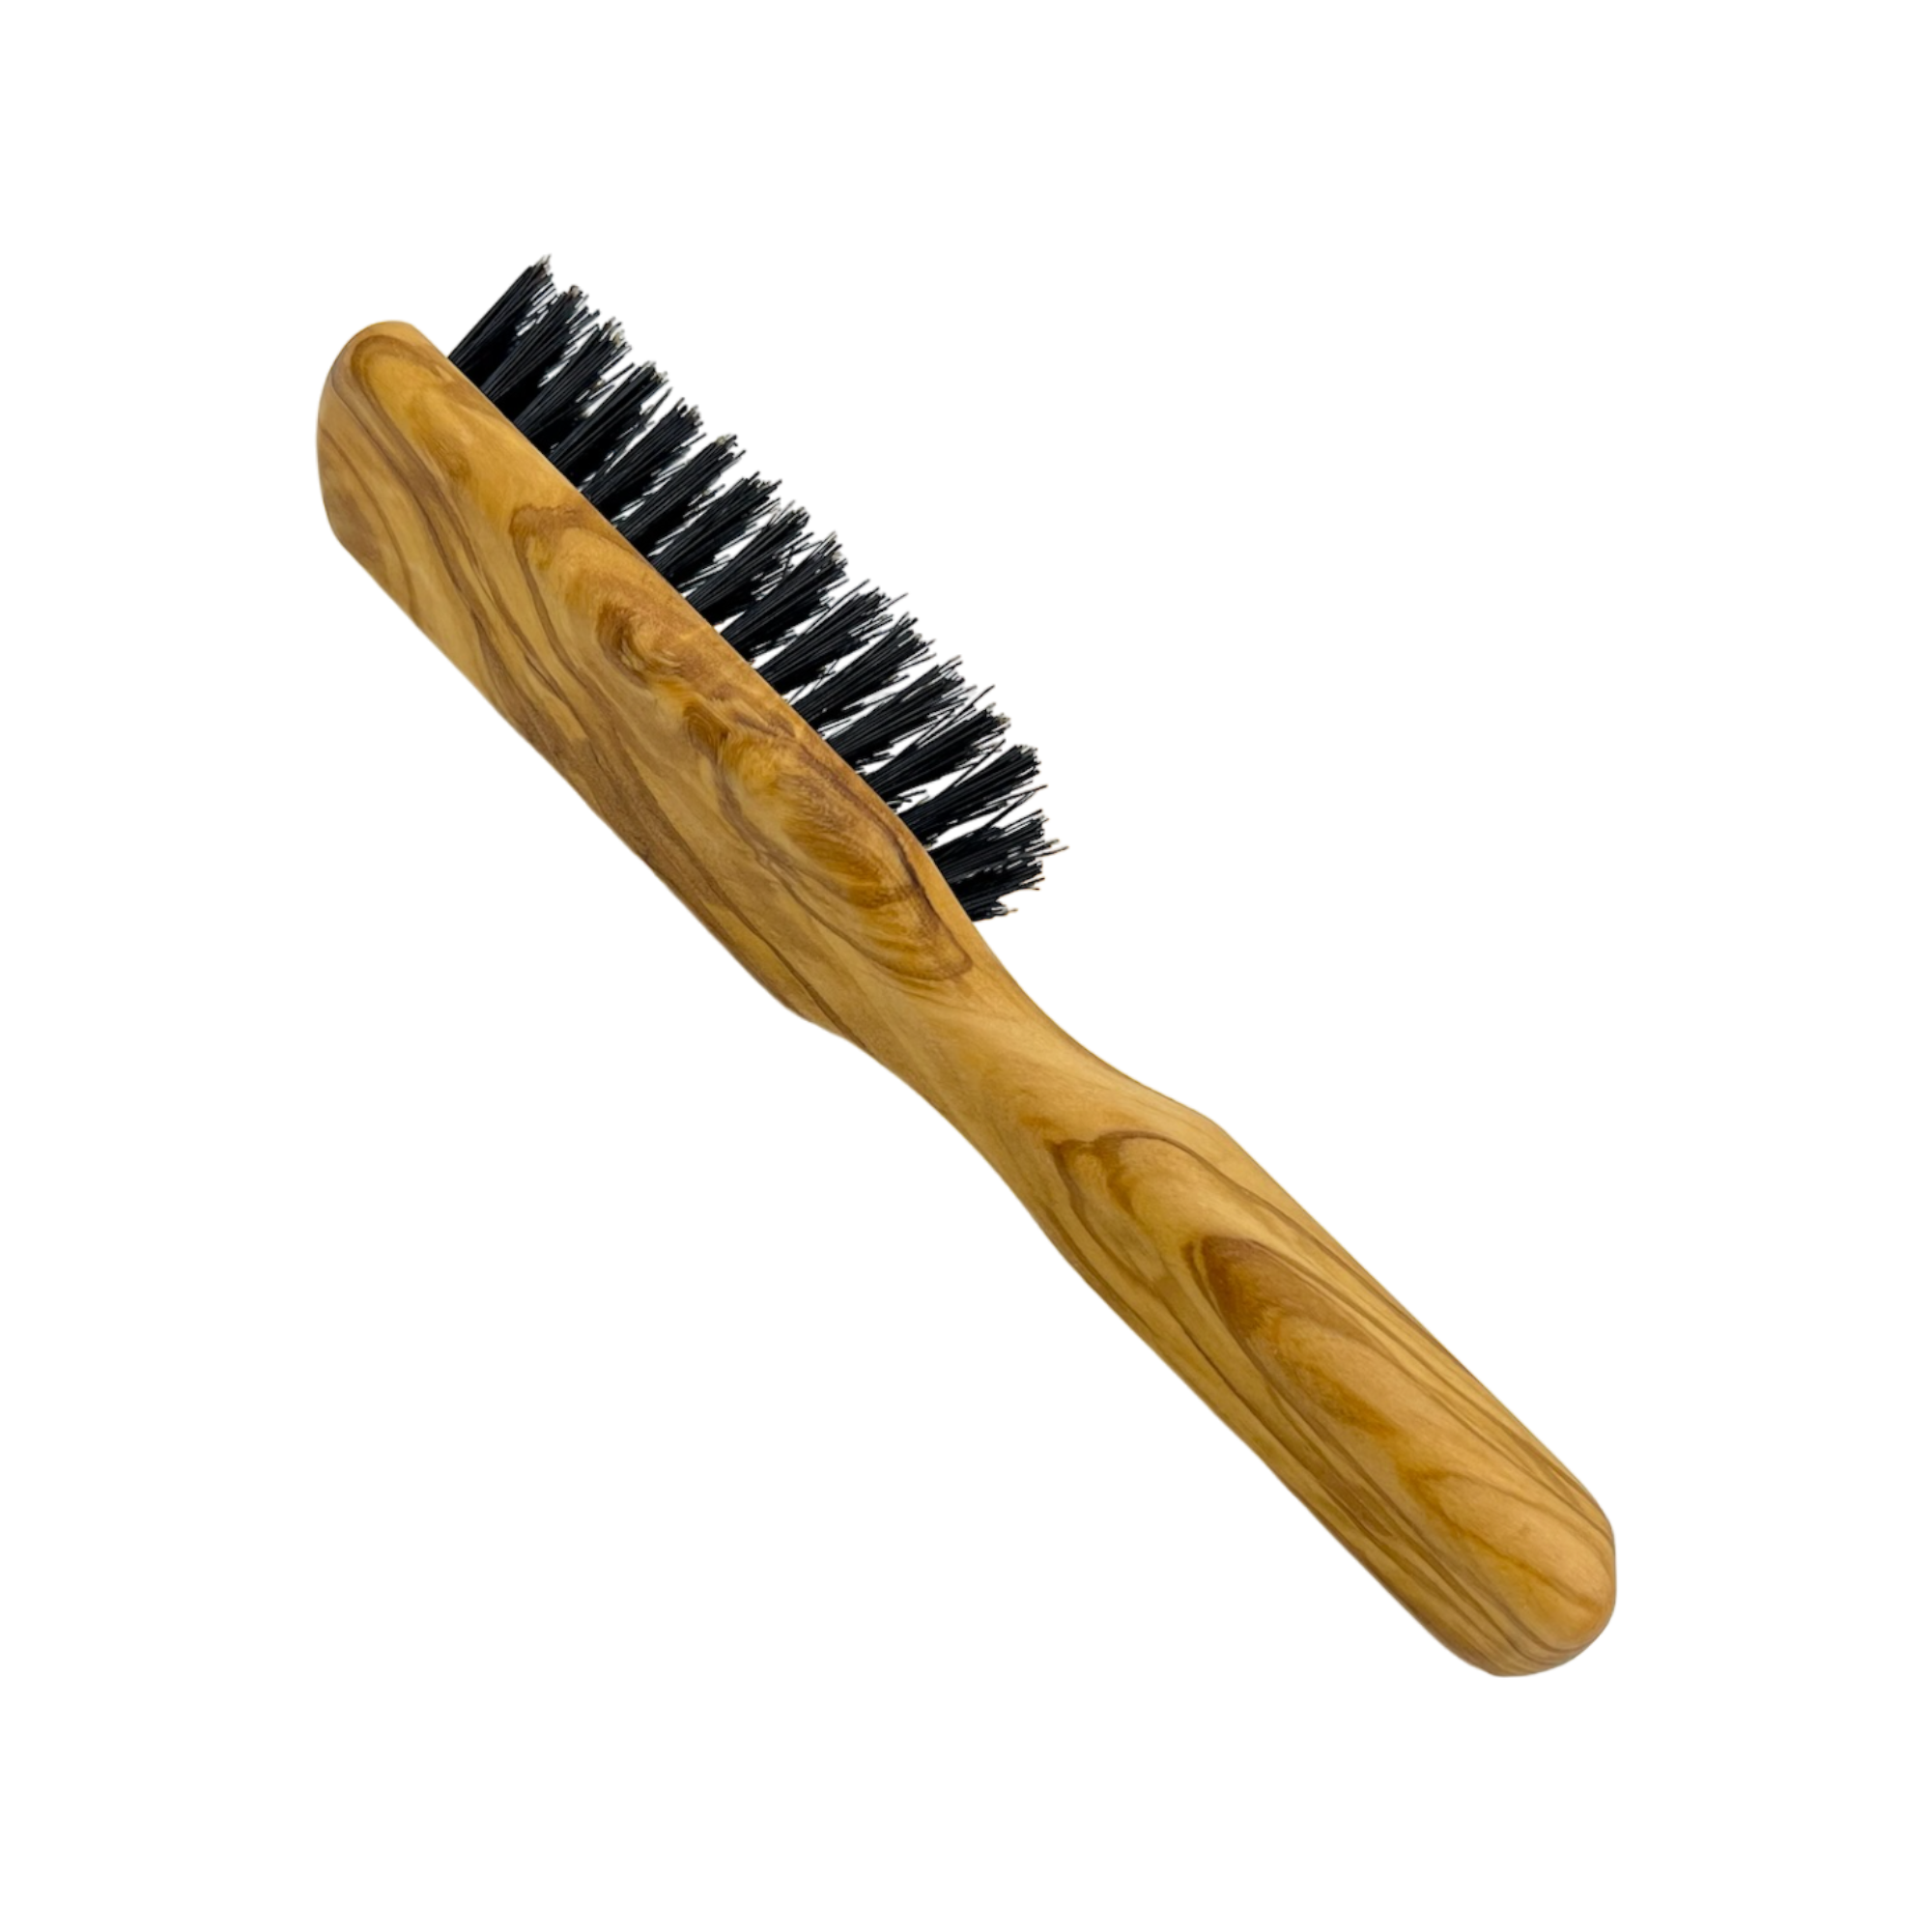 Dural Olive wood hair brush with boar bristles - 5 rows